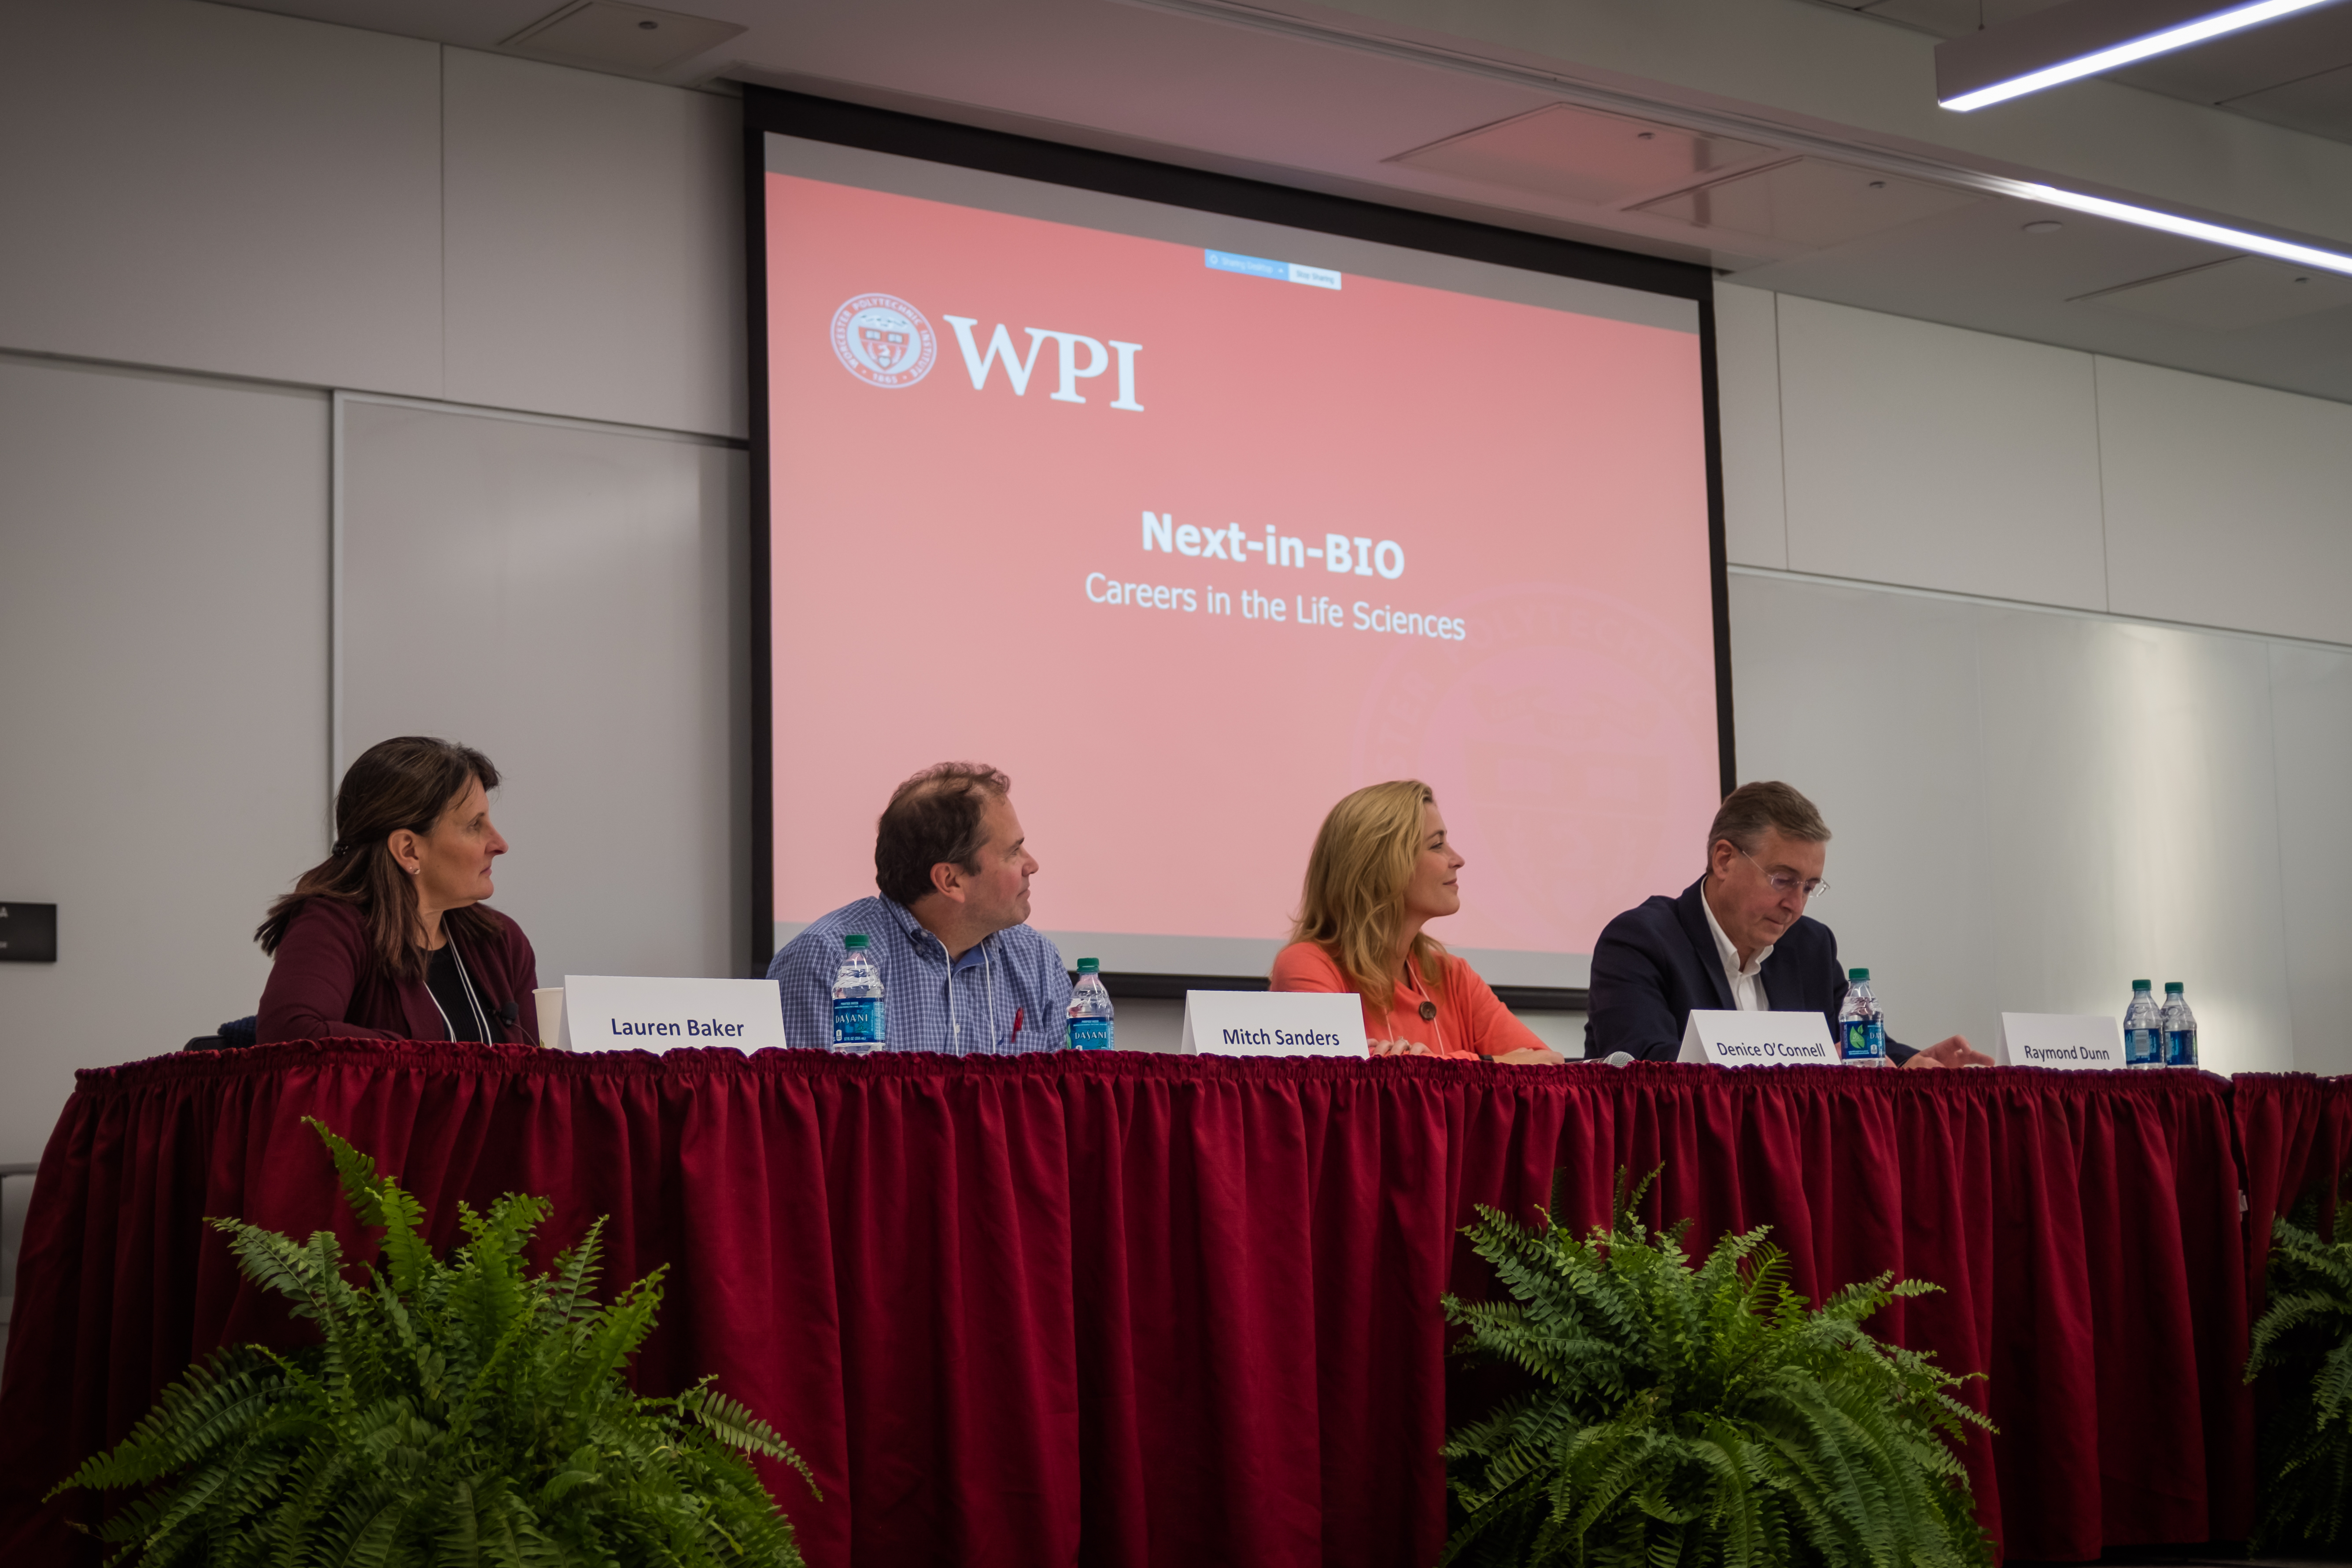 Members of the Next-in-Bio panel participate in a discussion.